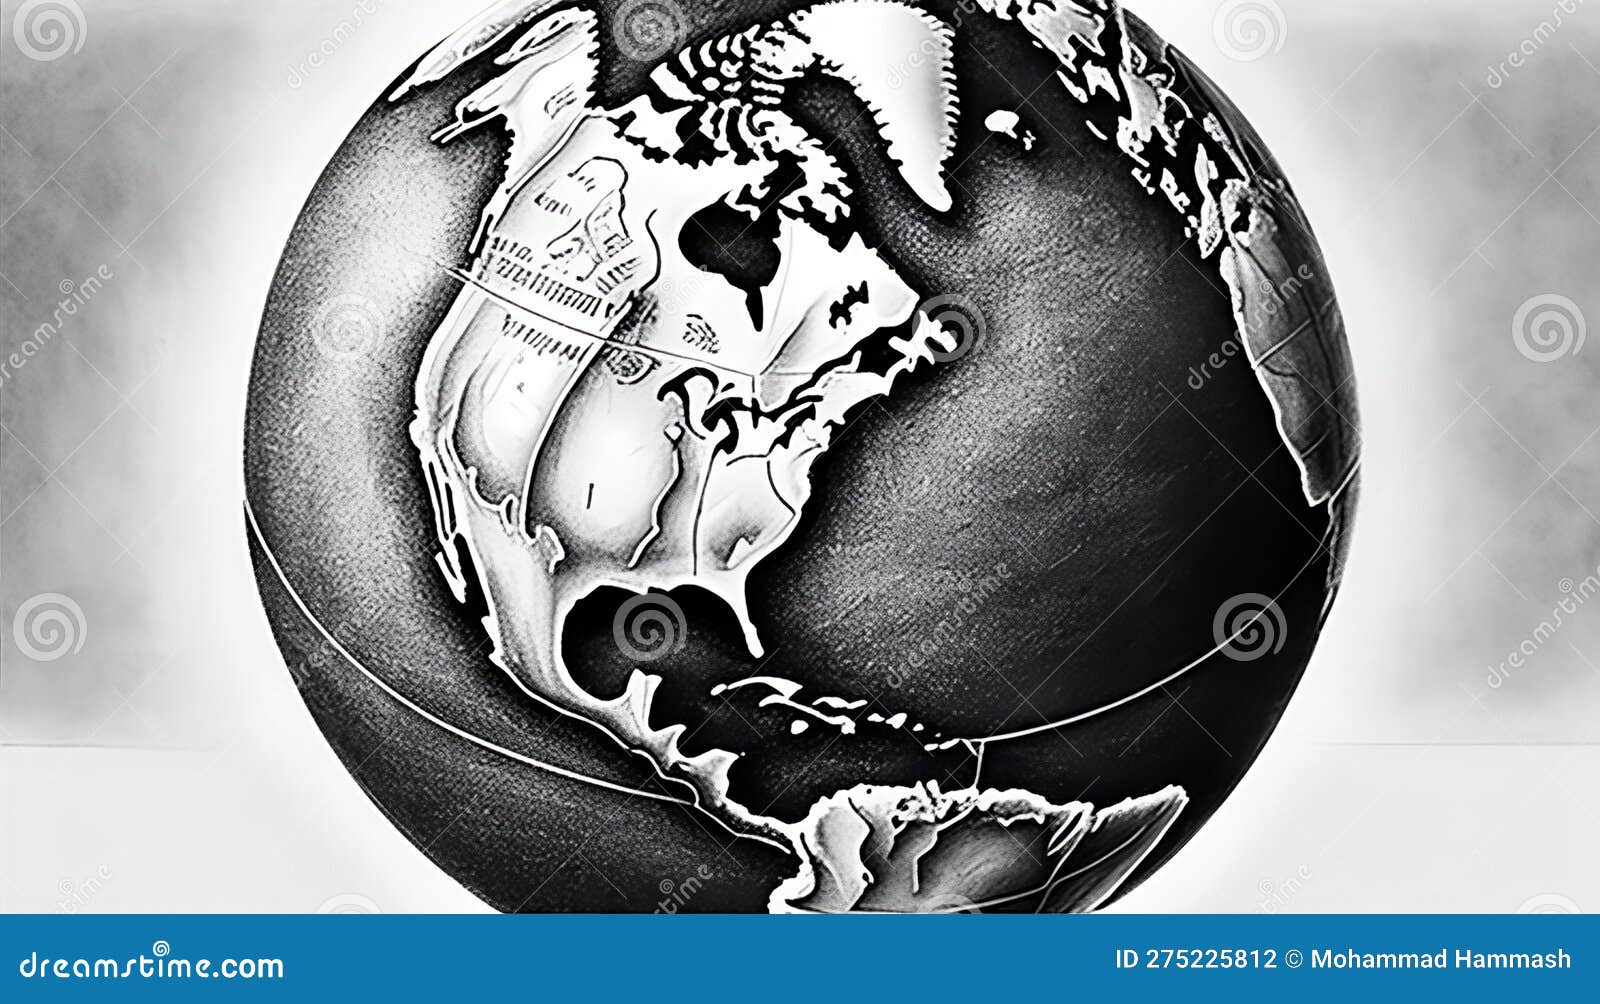 Discover 76+ pencil sketch of earth latest - in.eteachers